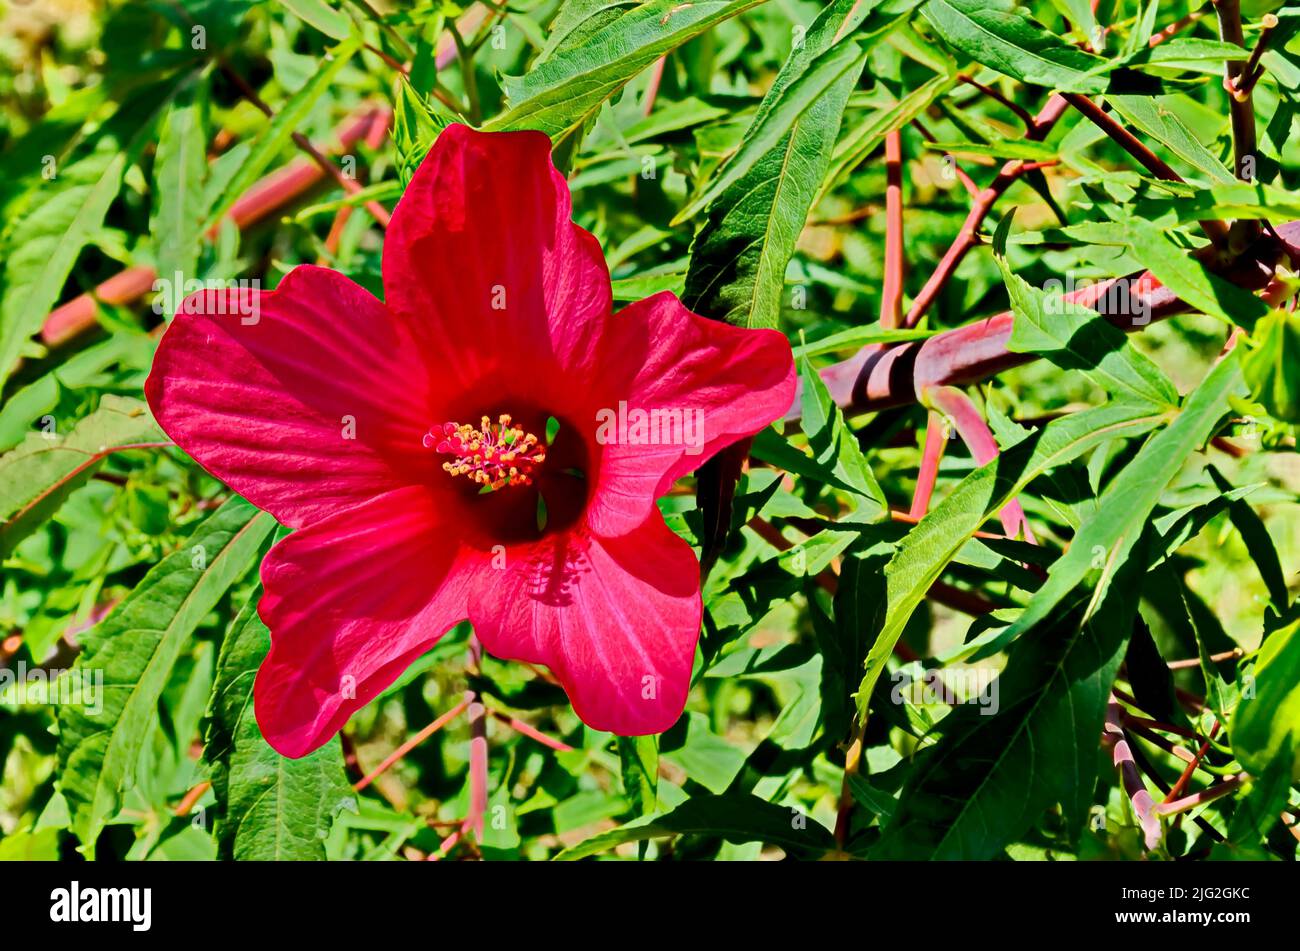 Close-up of single sweet red flowers of hibiscus or rosa sinensis, blooming on branches with green leaves, Sofia, Bulgaria Stock Photo